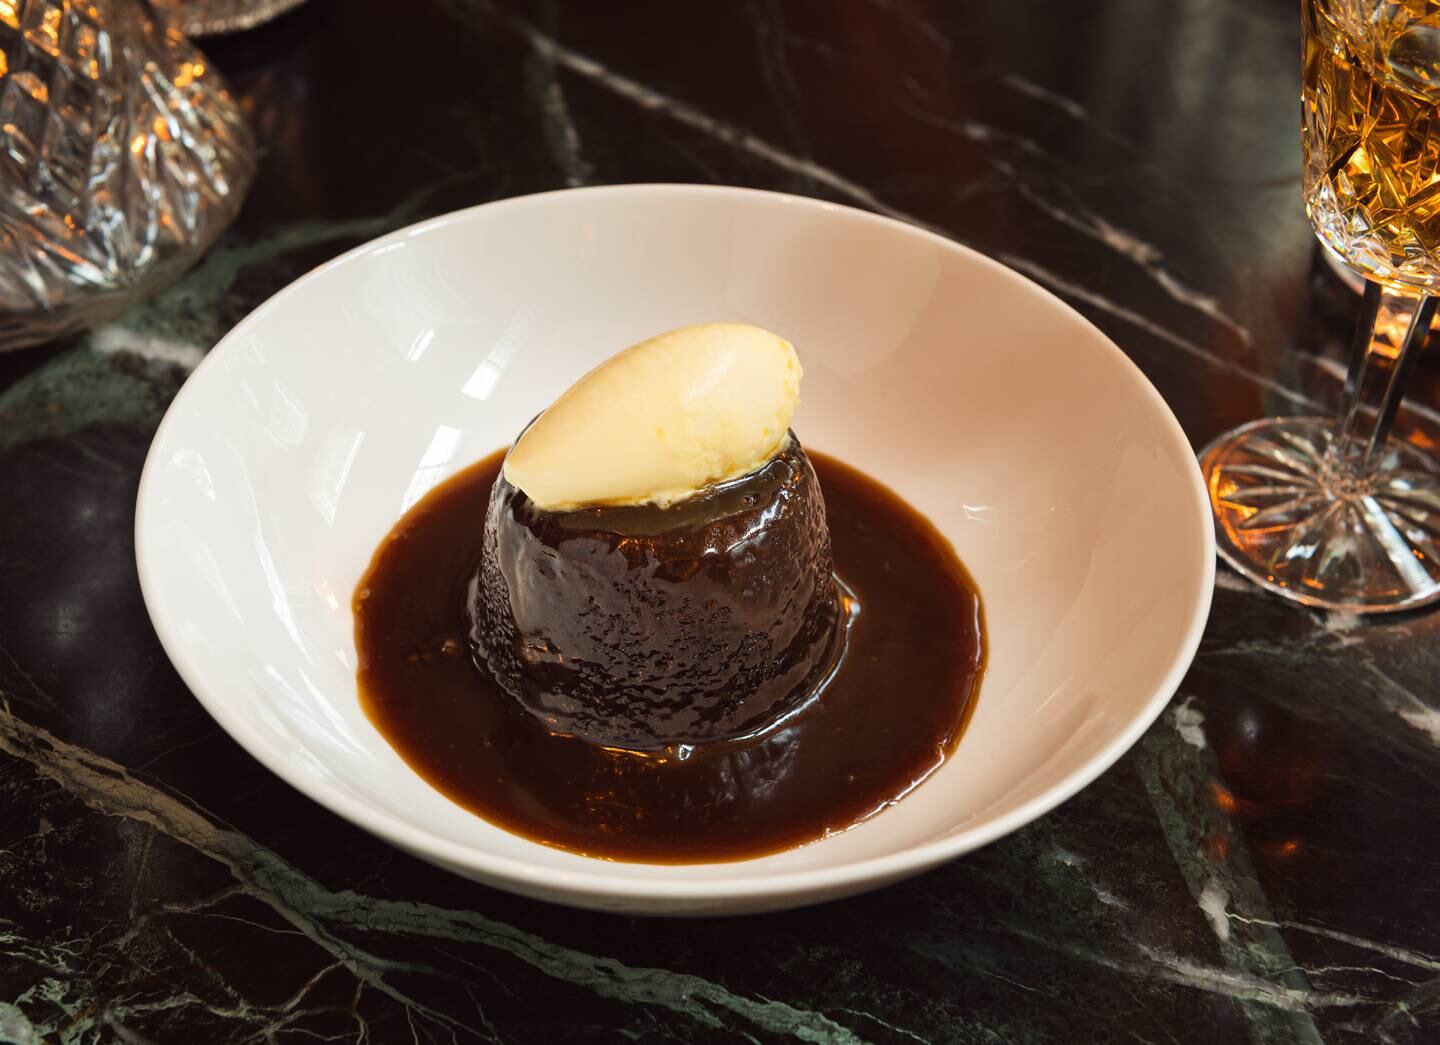 The chef-recommended sticky toffee pudding. Photo: Hawksmoor Group